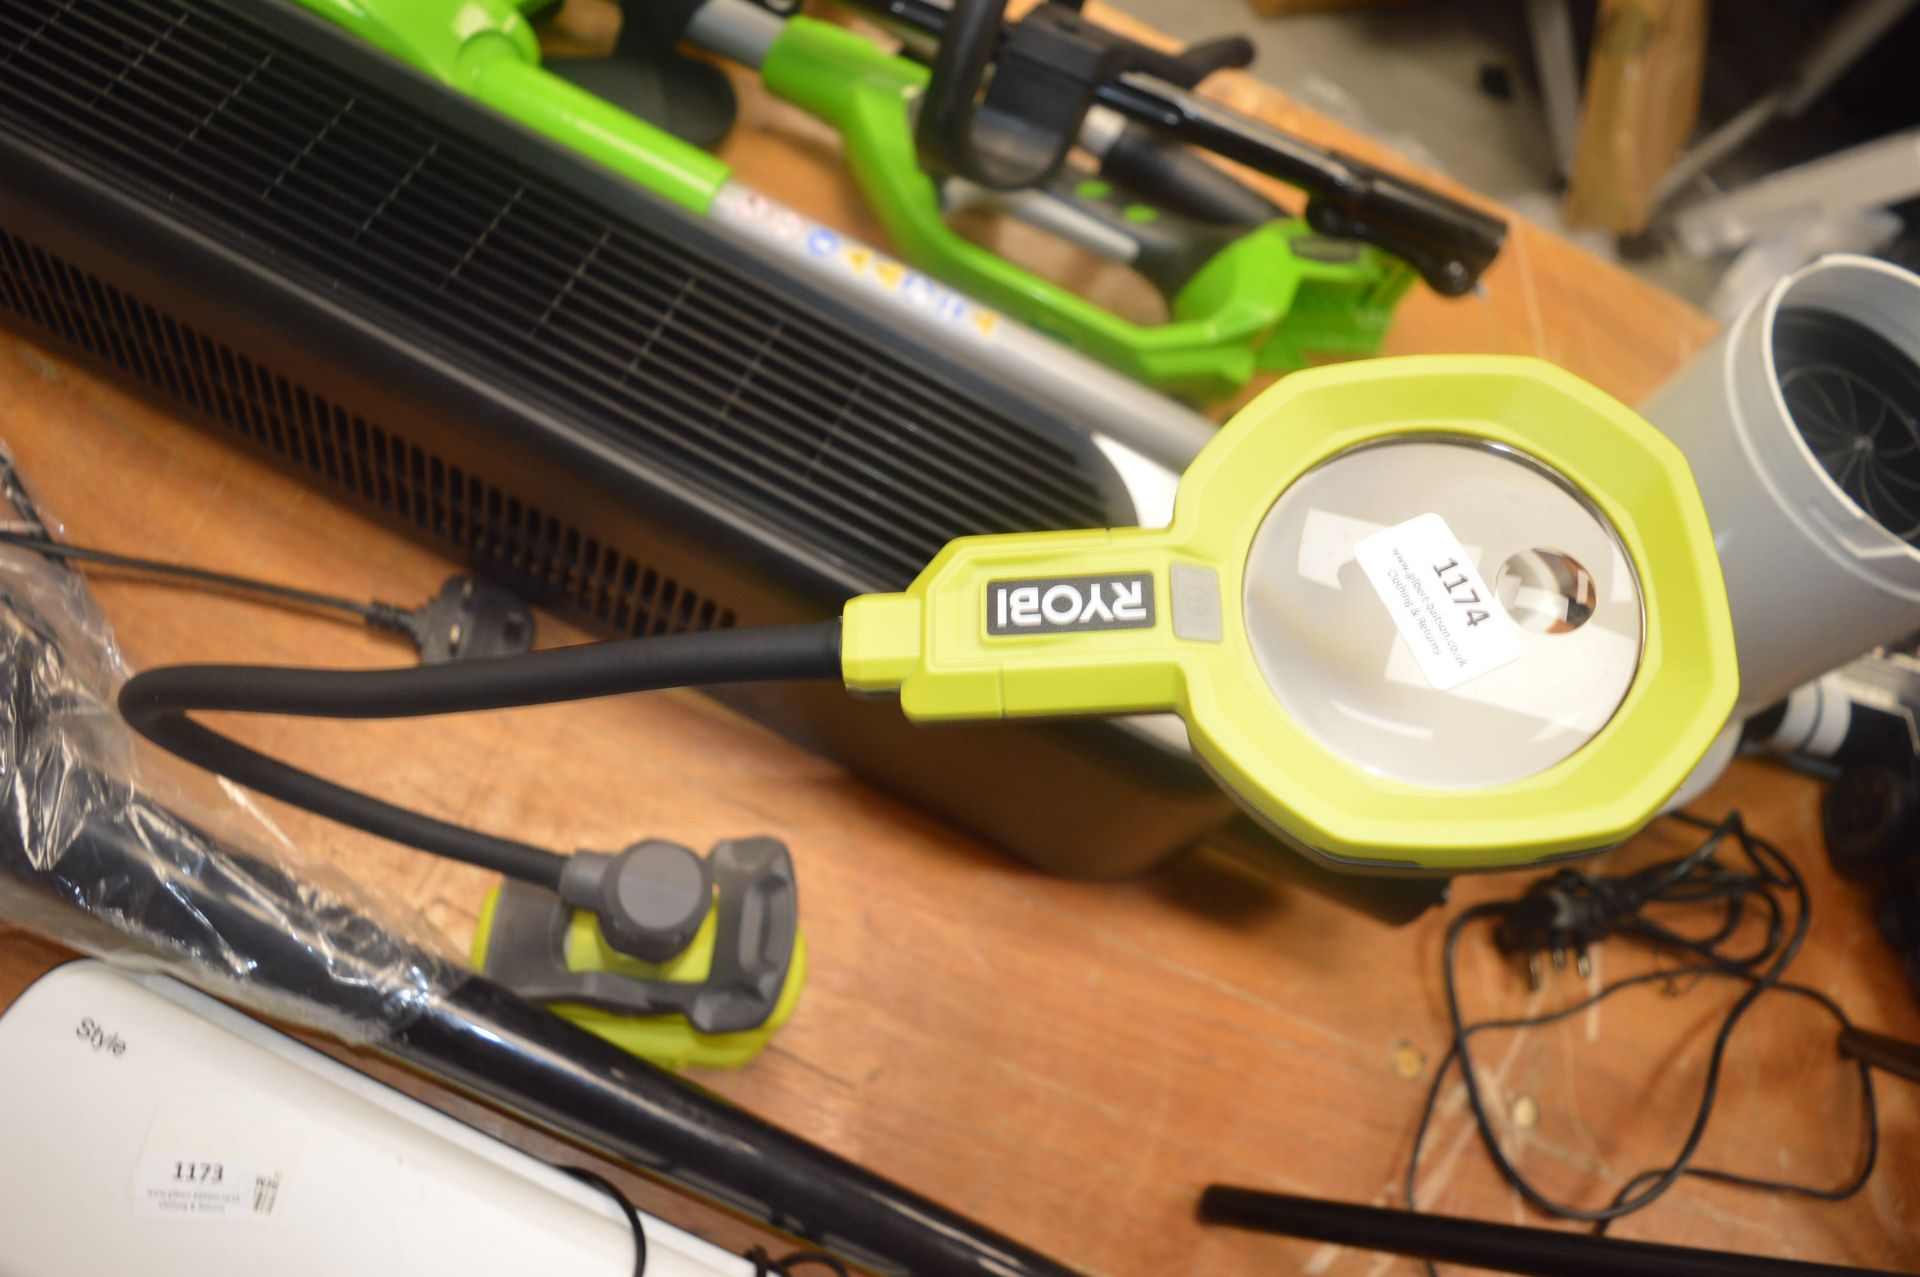 *Ryobi Industrial Light and Magnifying Glass